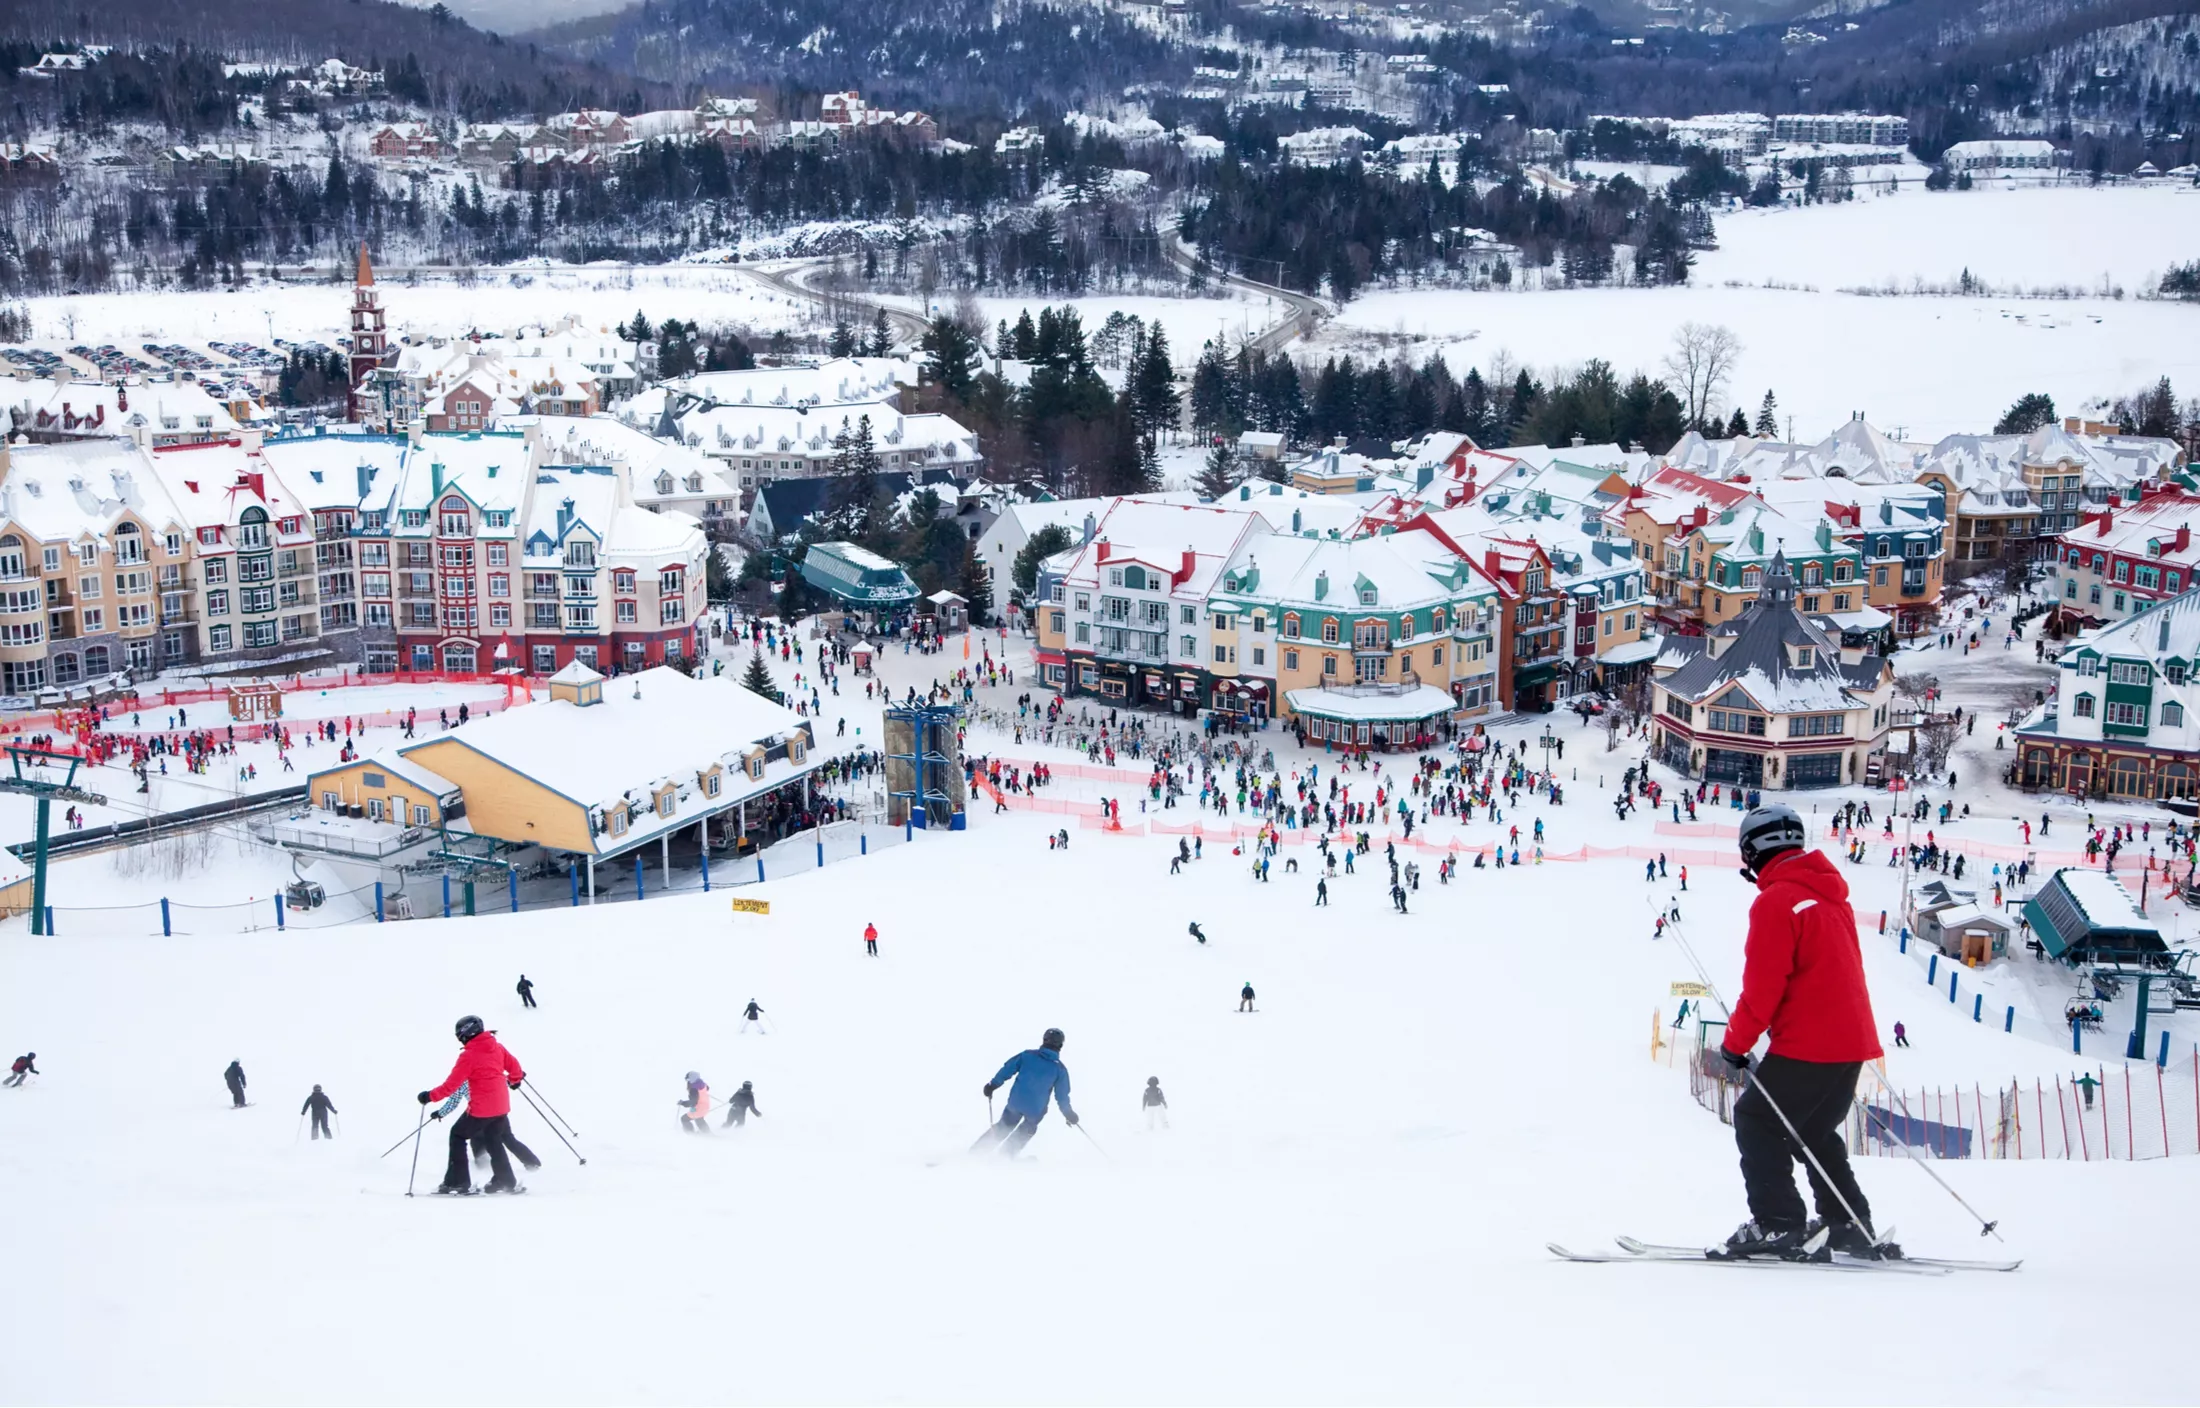 Mont-Tremblant Ski Resort in Canada, North America | Snowboarding,Skiing - Rated 5.6